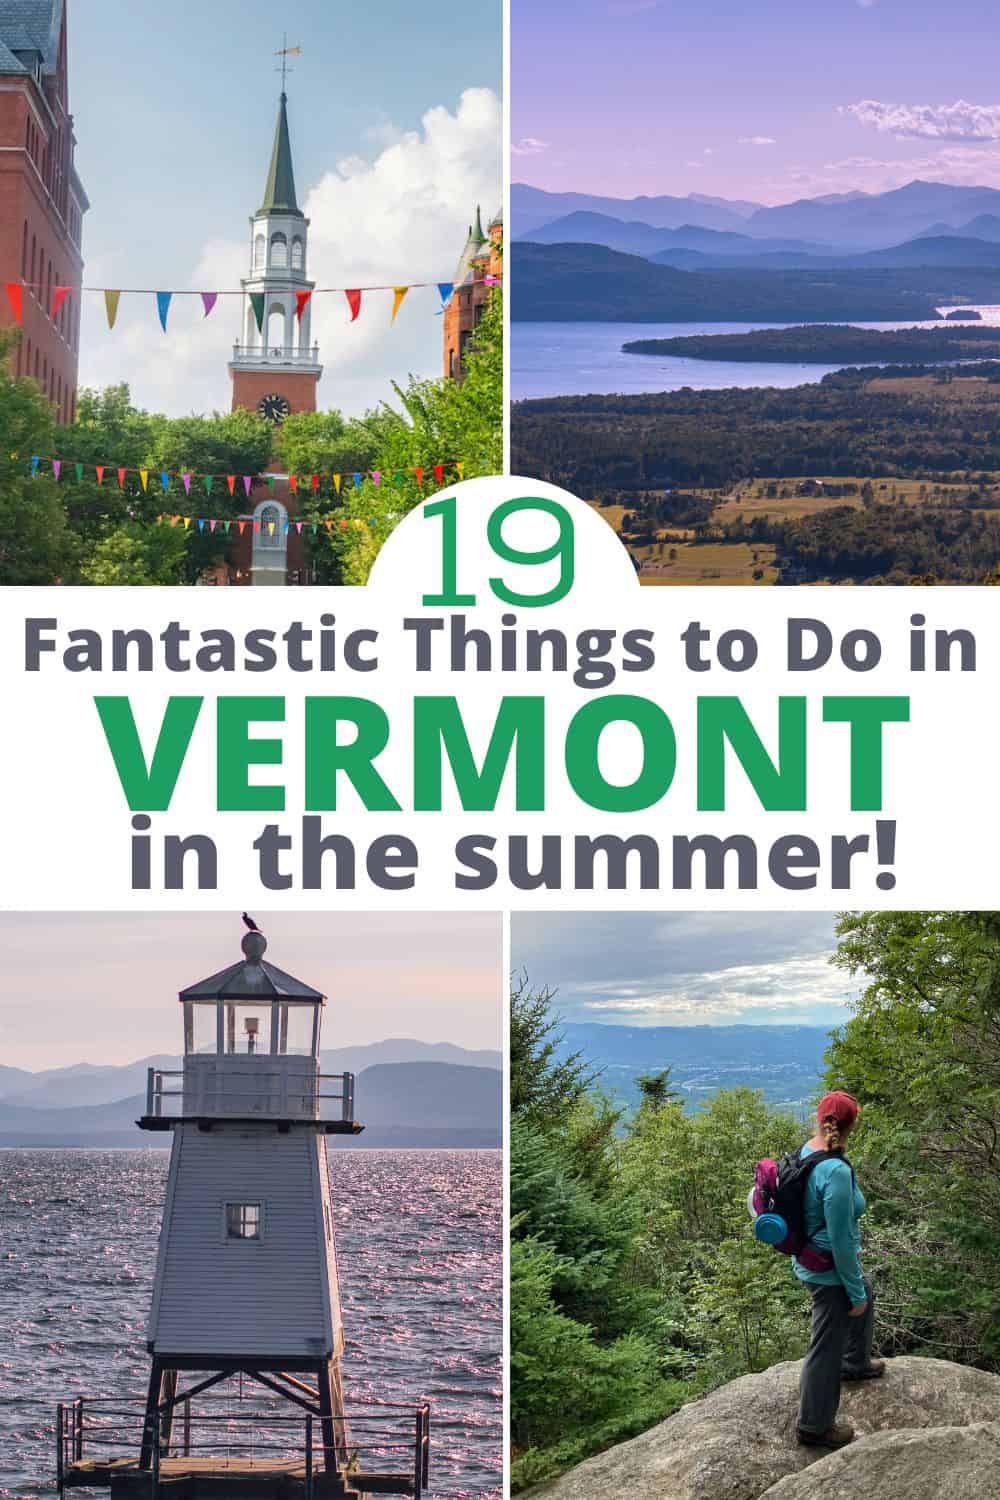 Summer in Vermont - mountains, lakes, and hiking trails. 